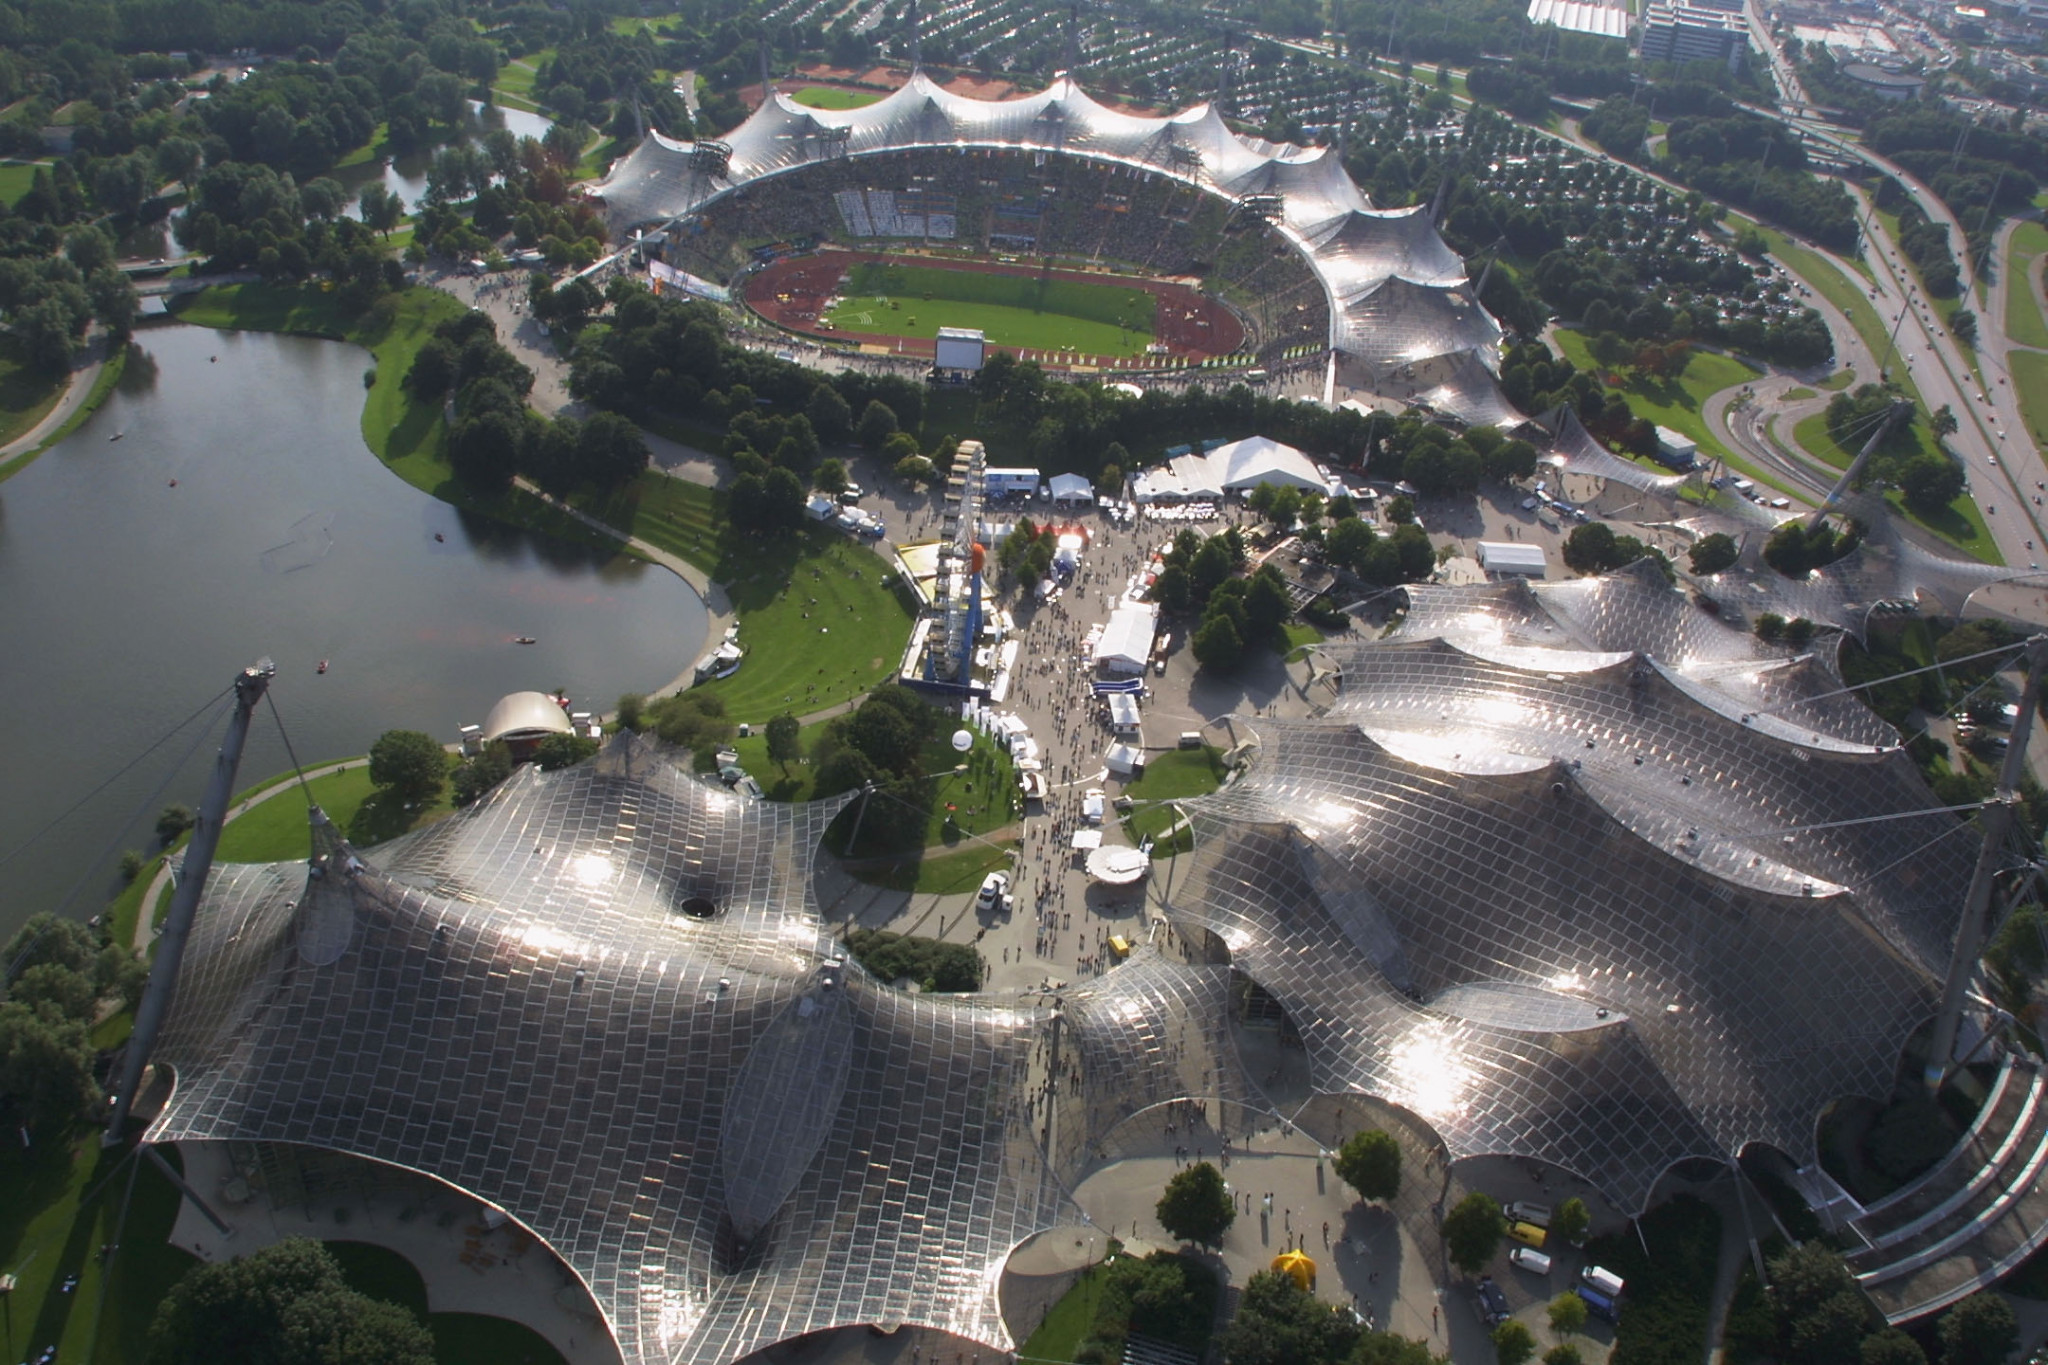 The Munich Olympiapark will act as a main hub for the European Championships ©Getty Images